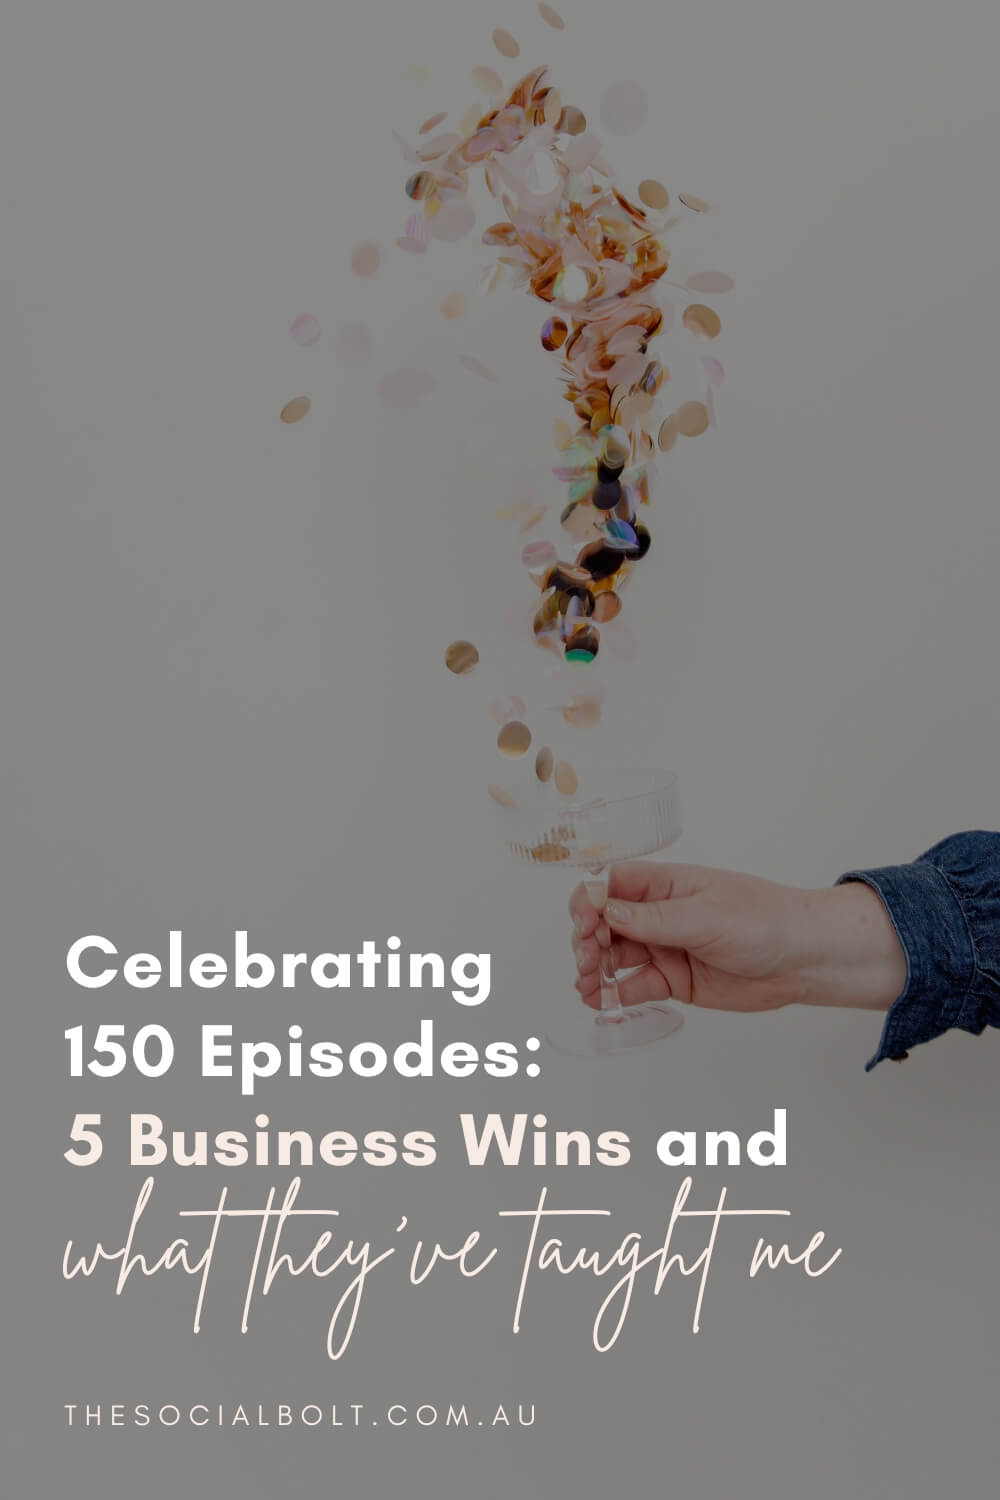 Celebrating 150 Episodes: 5 Business Wins and What They’ve Taught Me